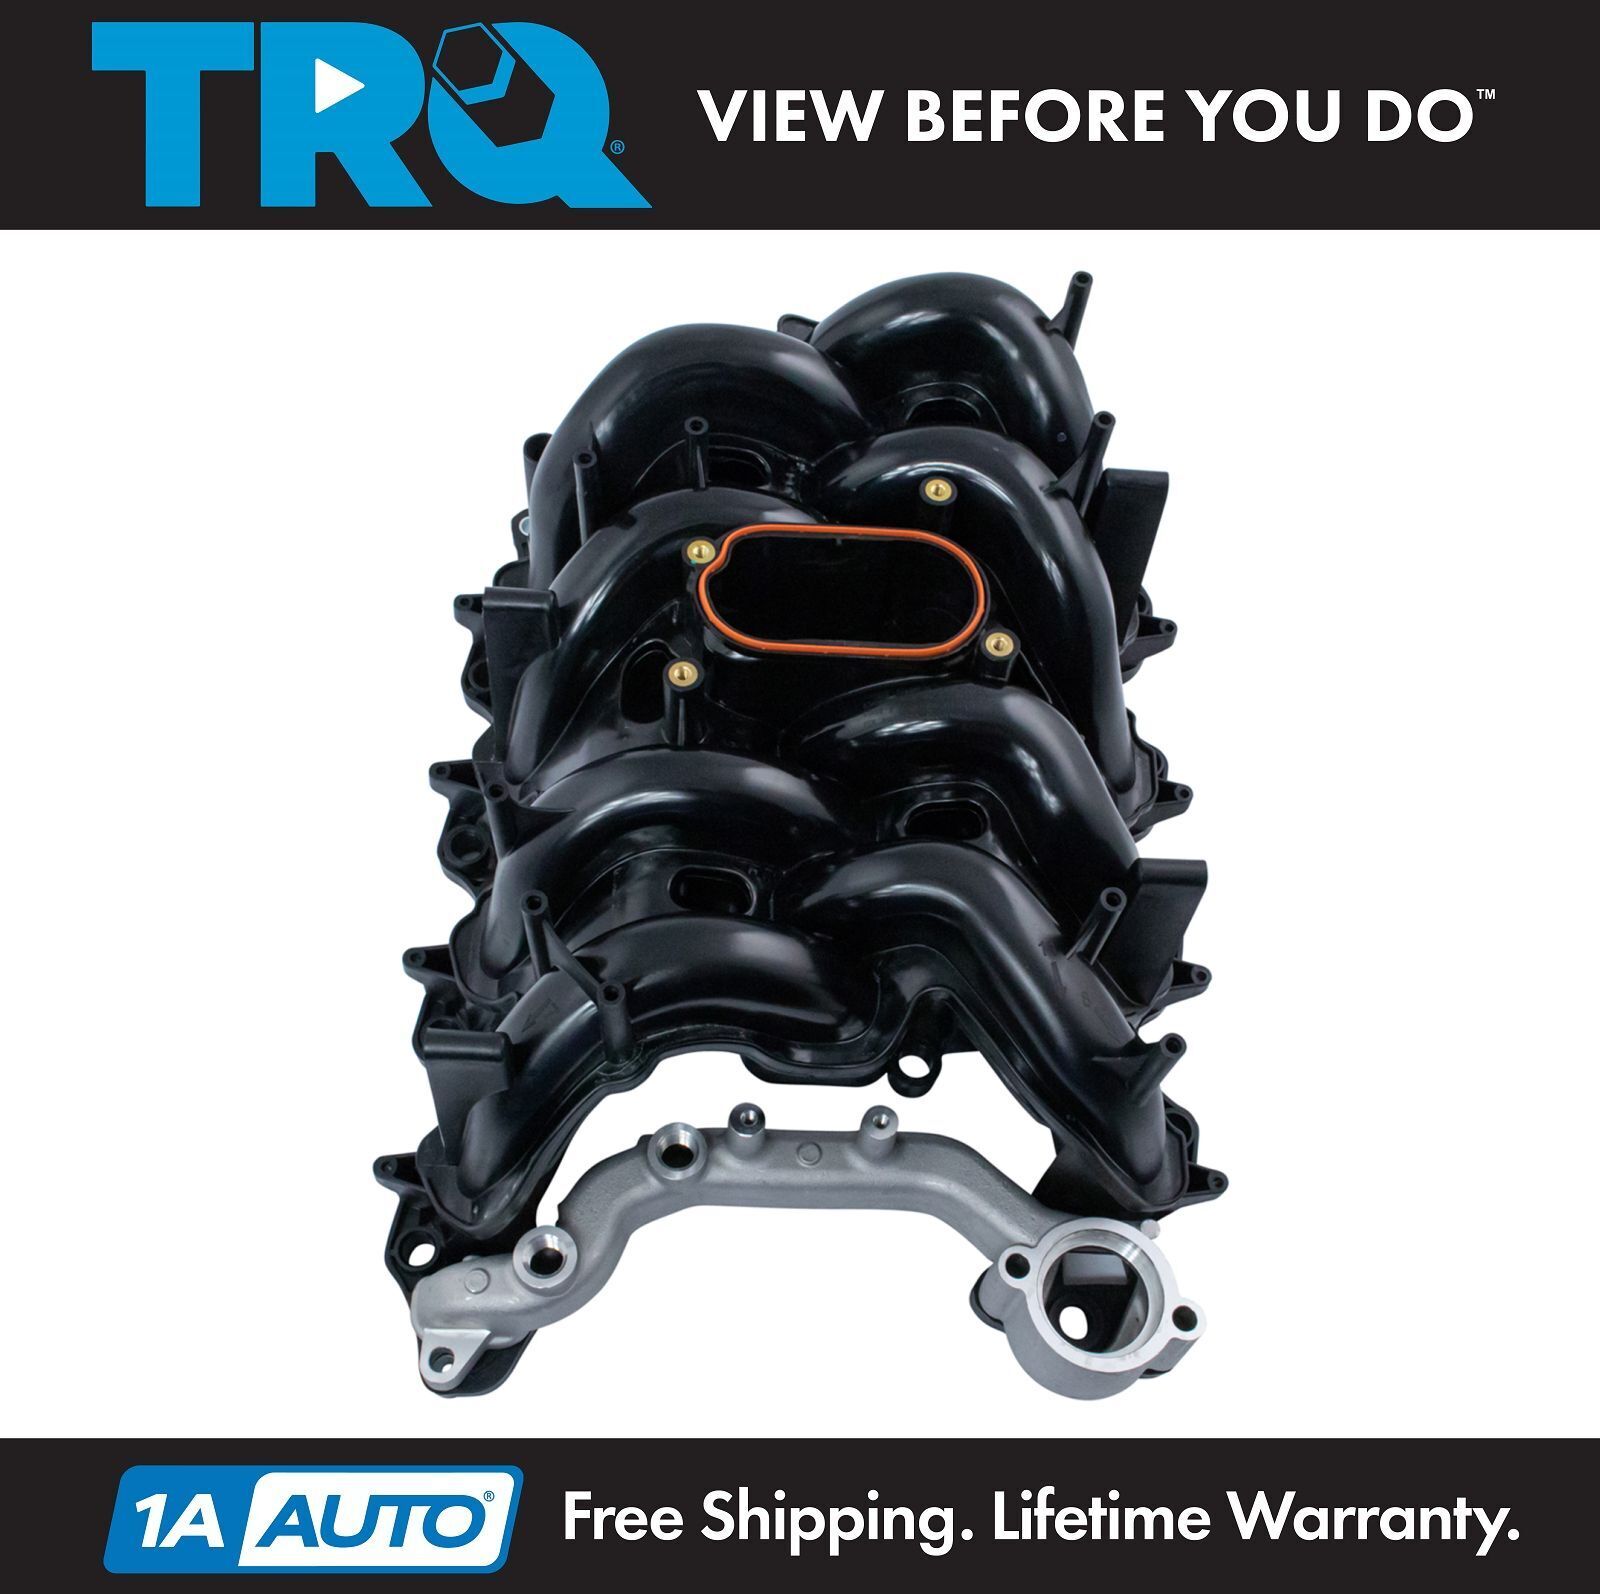 TRQ Upper Intake Manifold with Integrated Gaskets for ford Van Truck